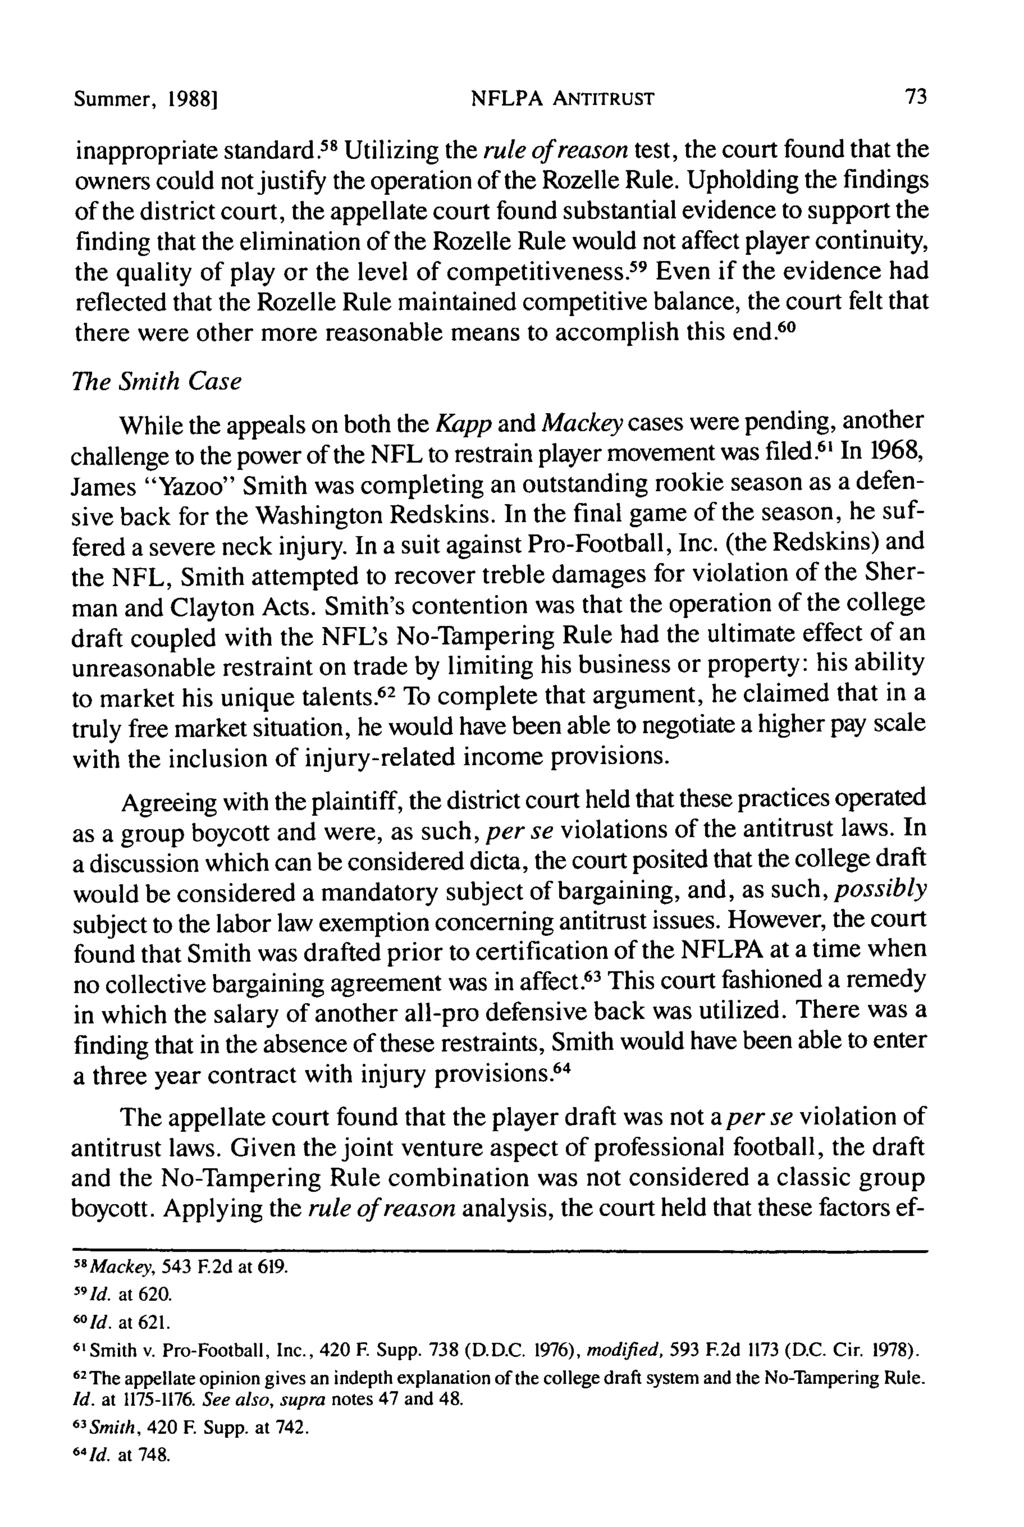 Summer, 19881 NFLPA ANTITRUST inappropriate standard. 58 Utilizing the rule of reason test, the court found that the owners could not justify the operation of the Rozelle Rule.